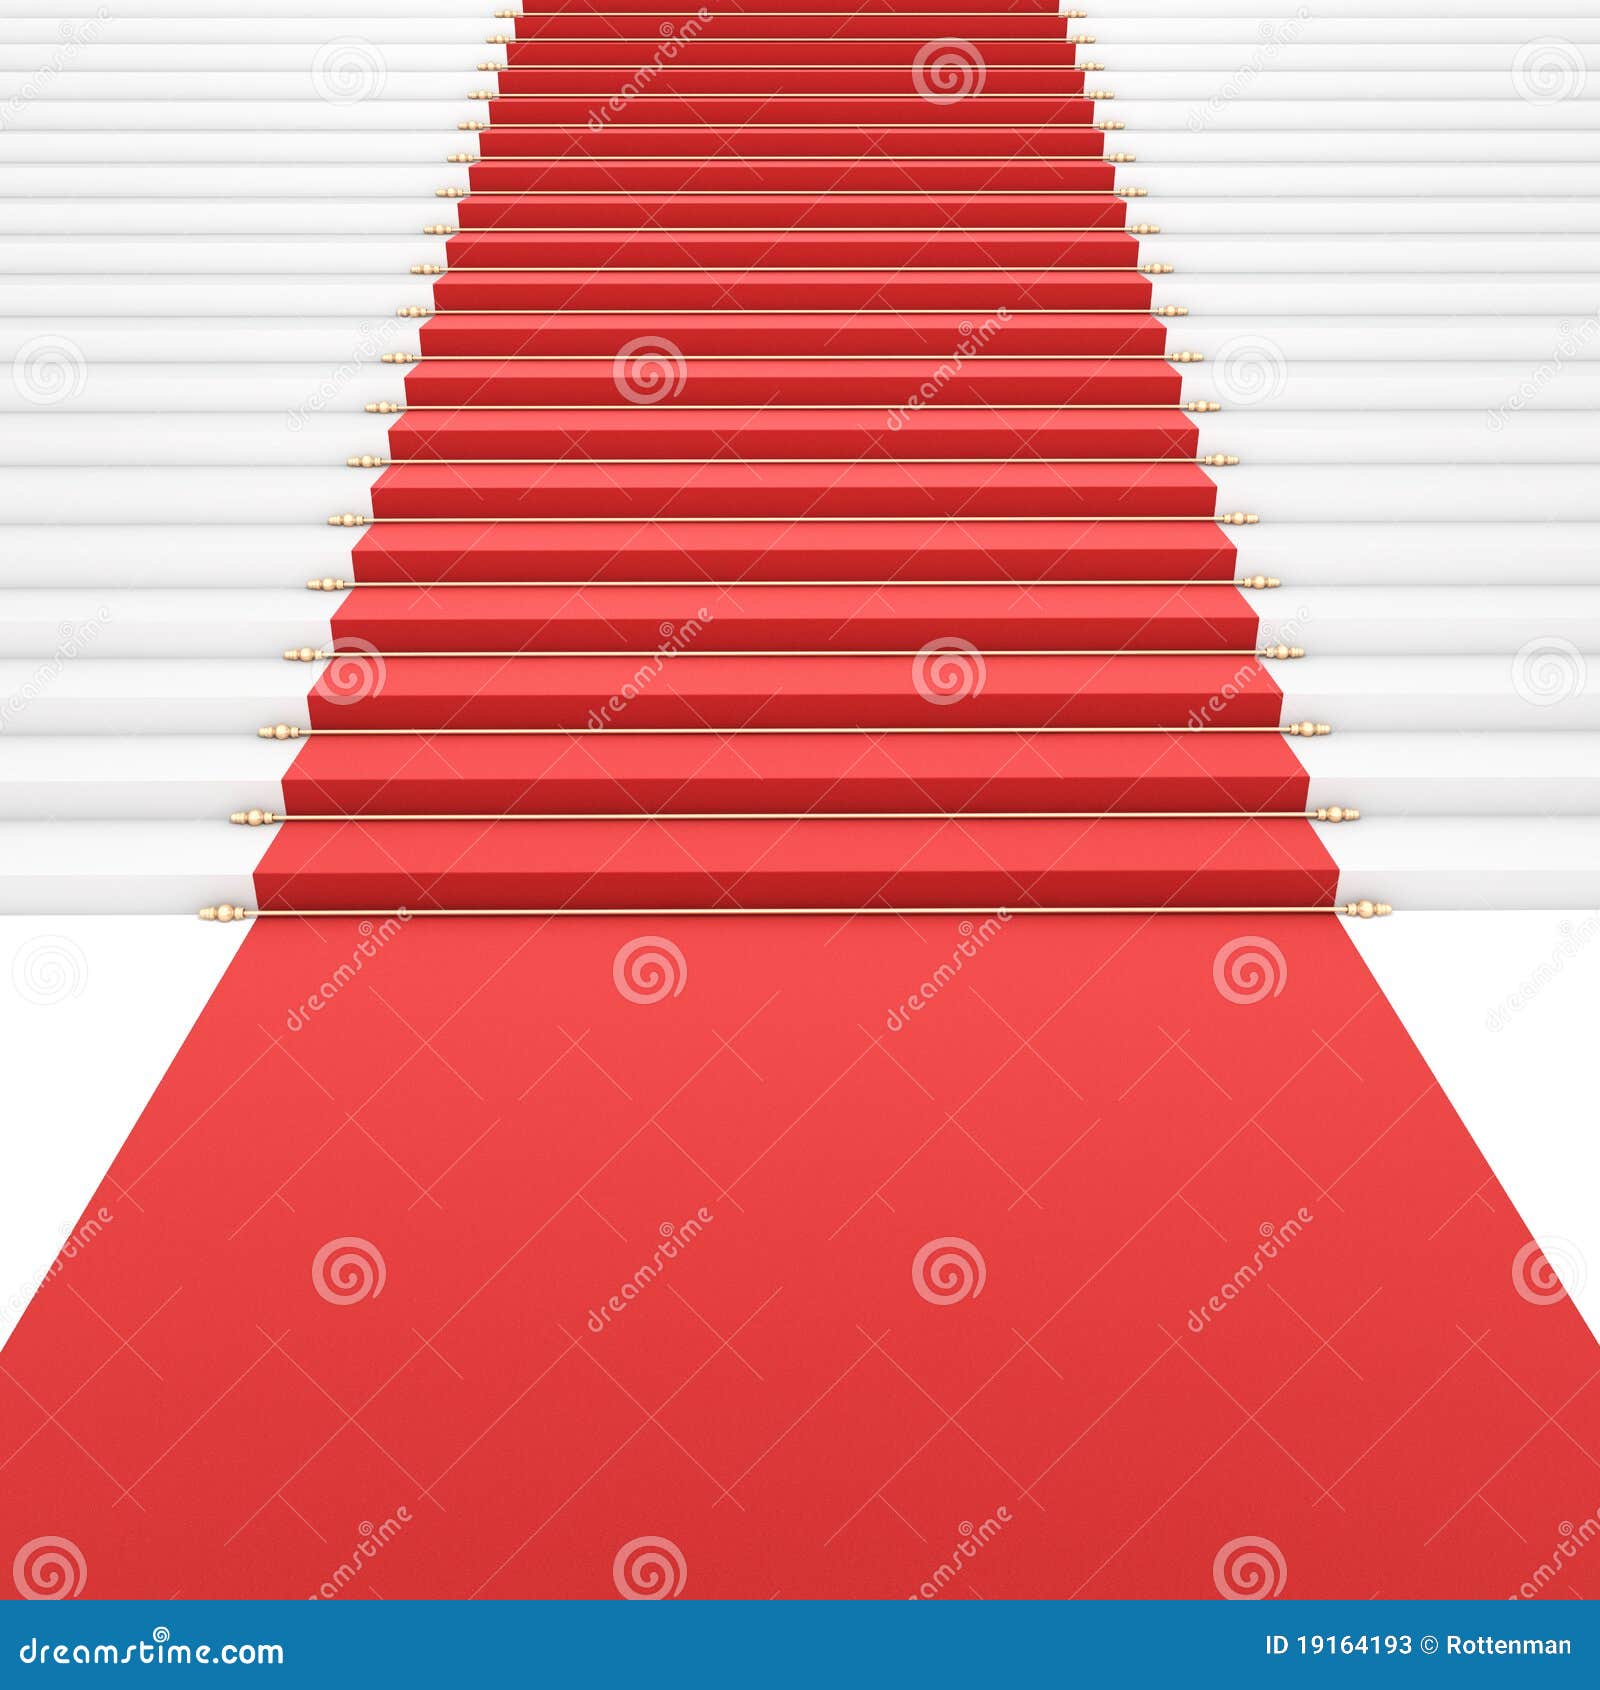 stairway to fame